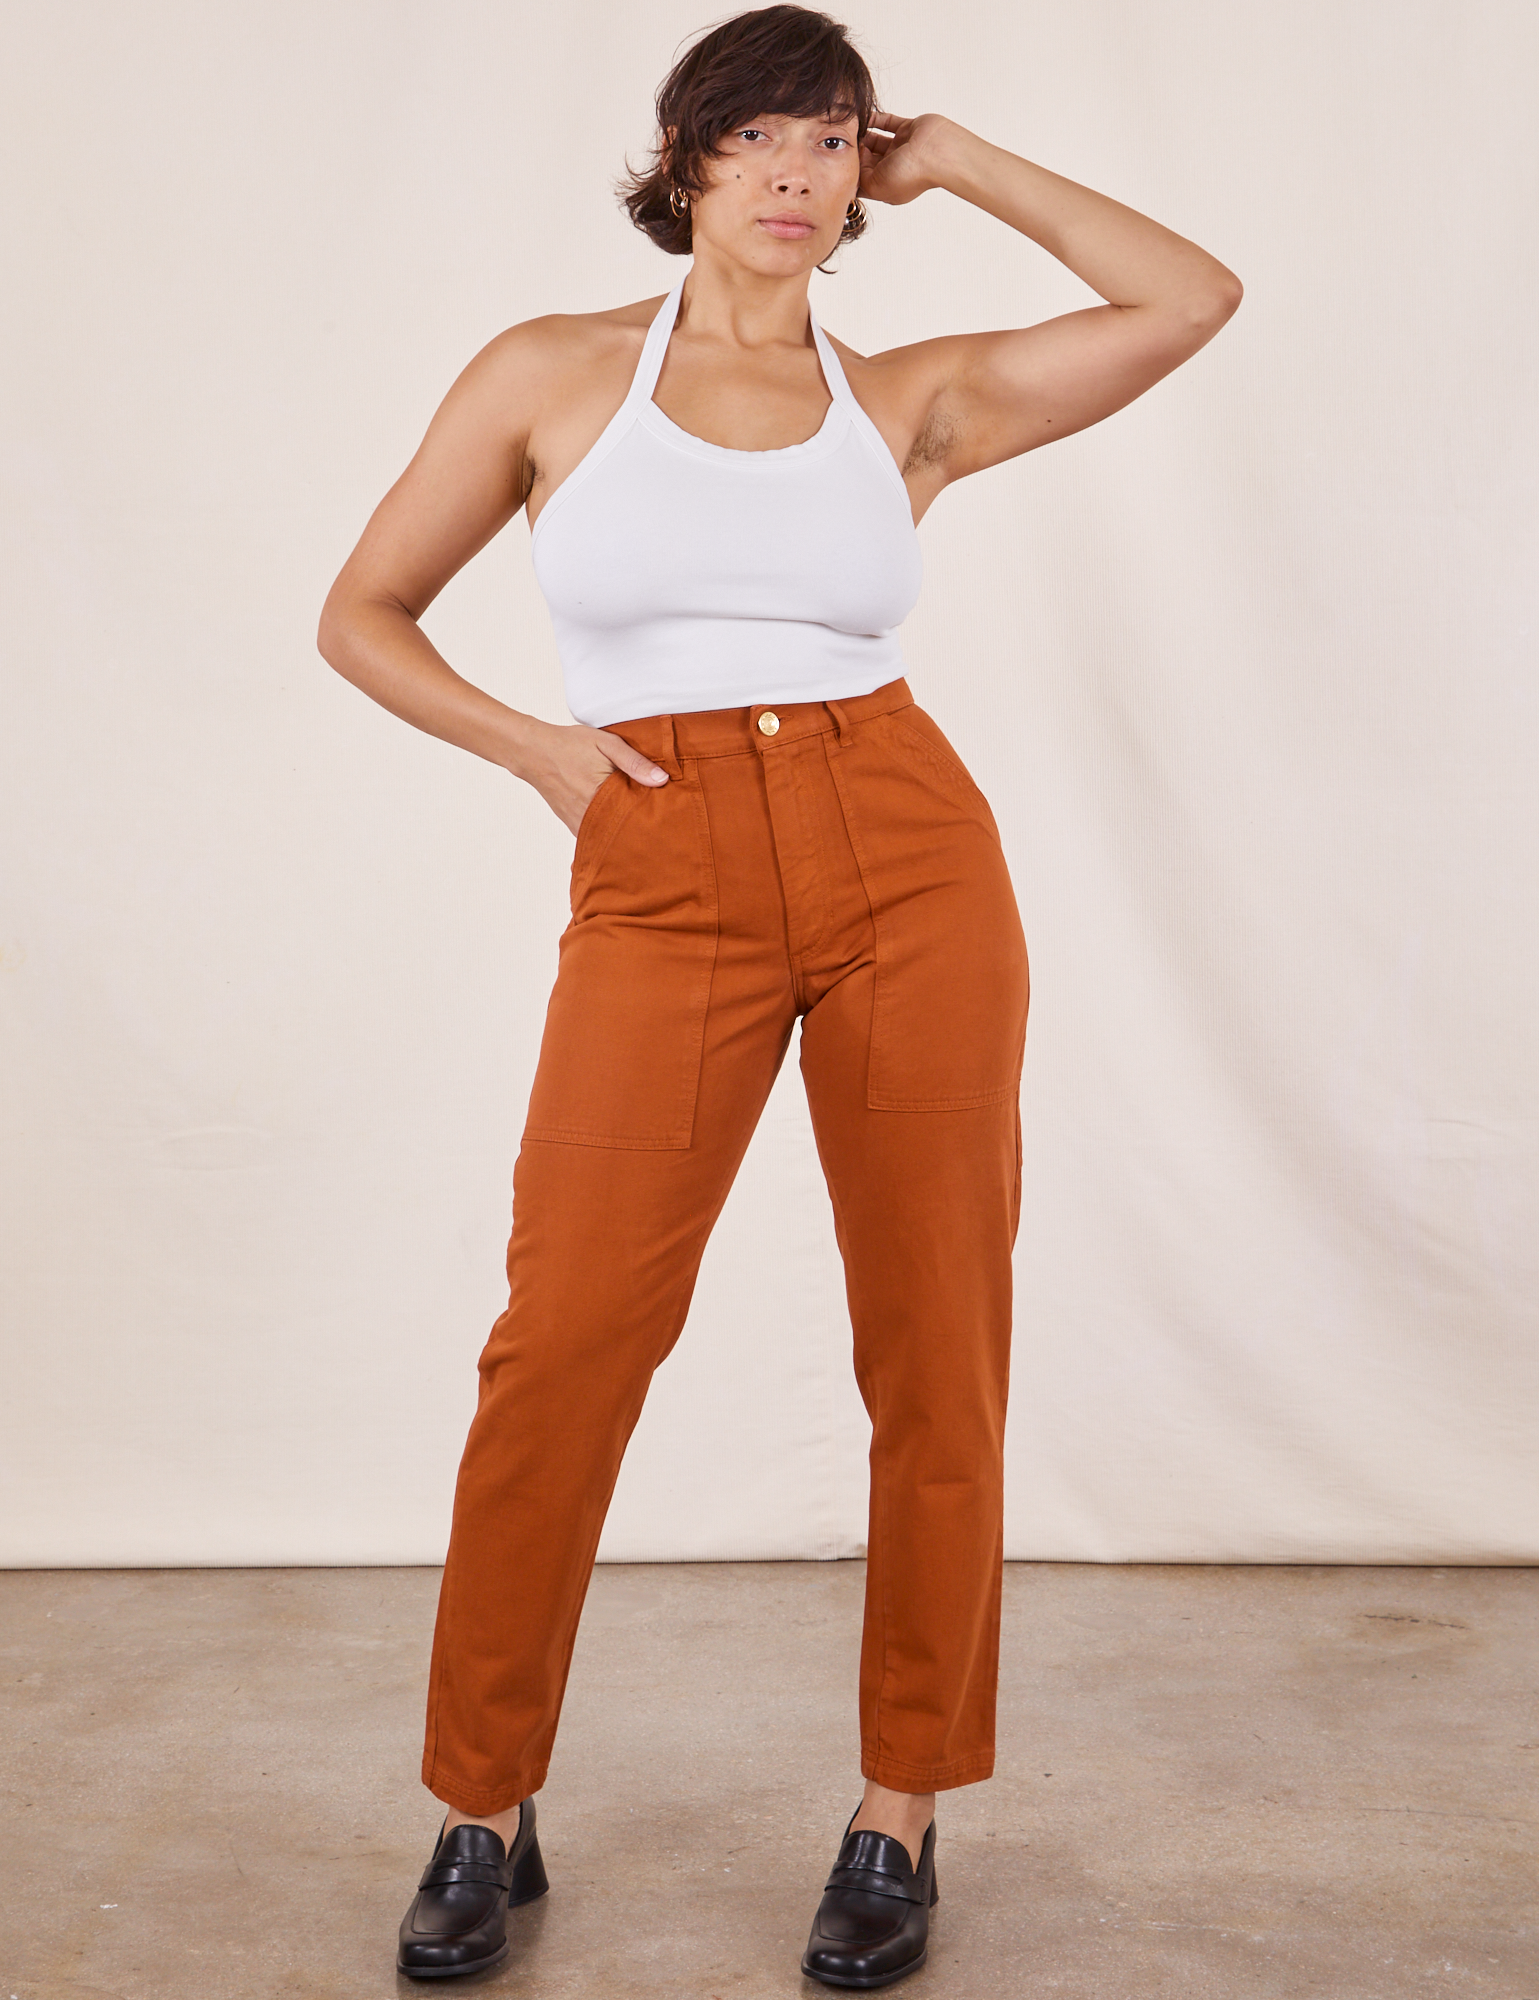 Tiara is 5&#39;4&quot; and wearing XS Pencil Pants in Burnt Terracotta paired with vintage off-white Halter Top